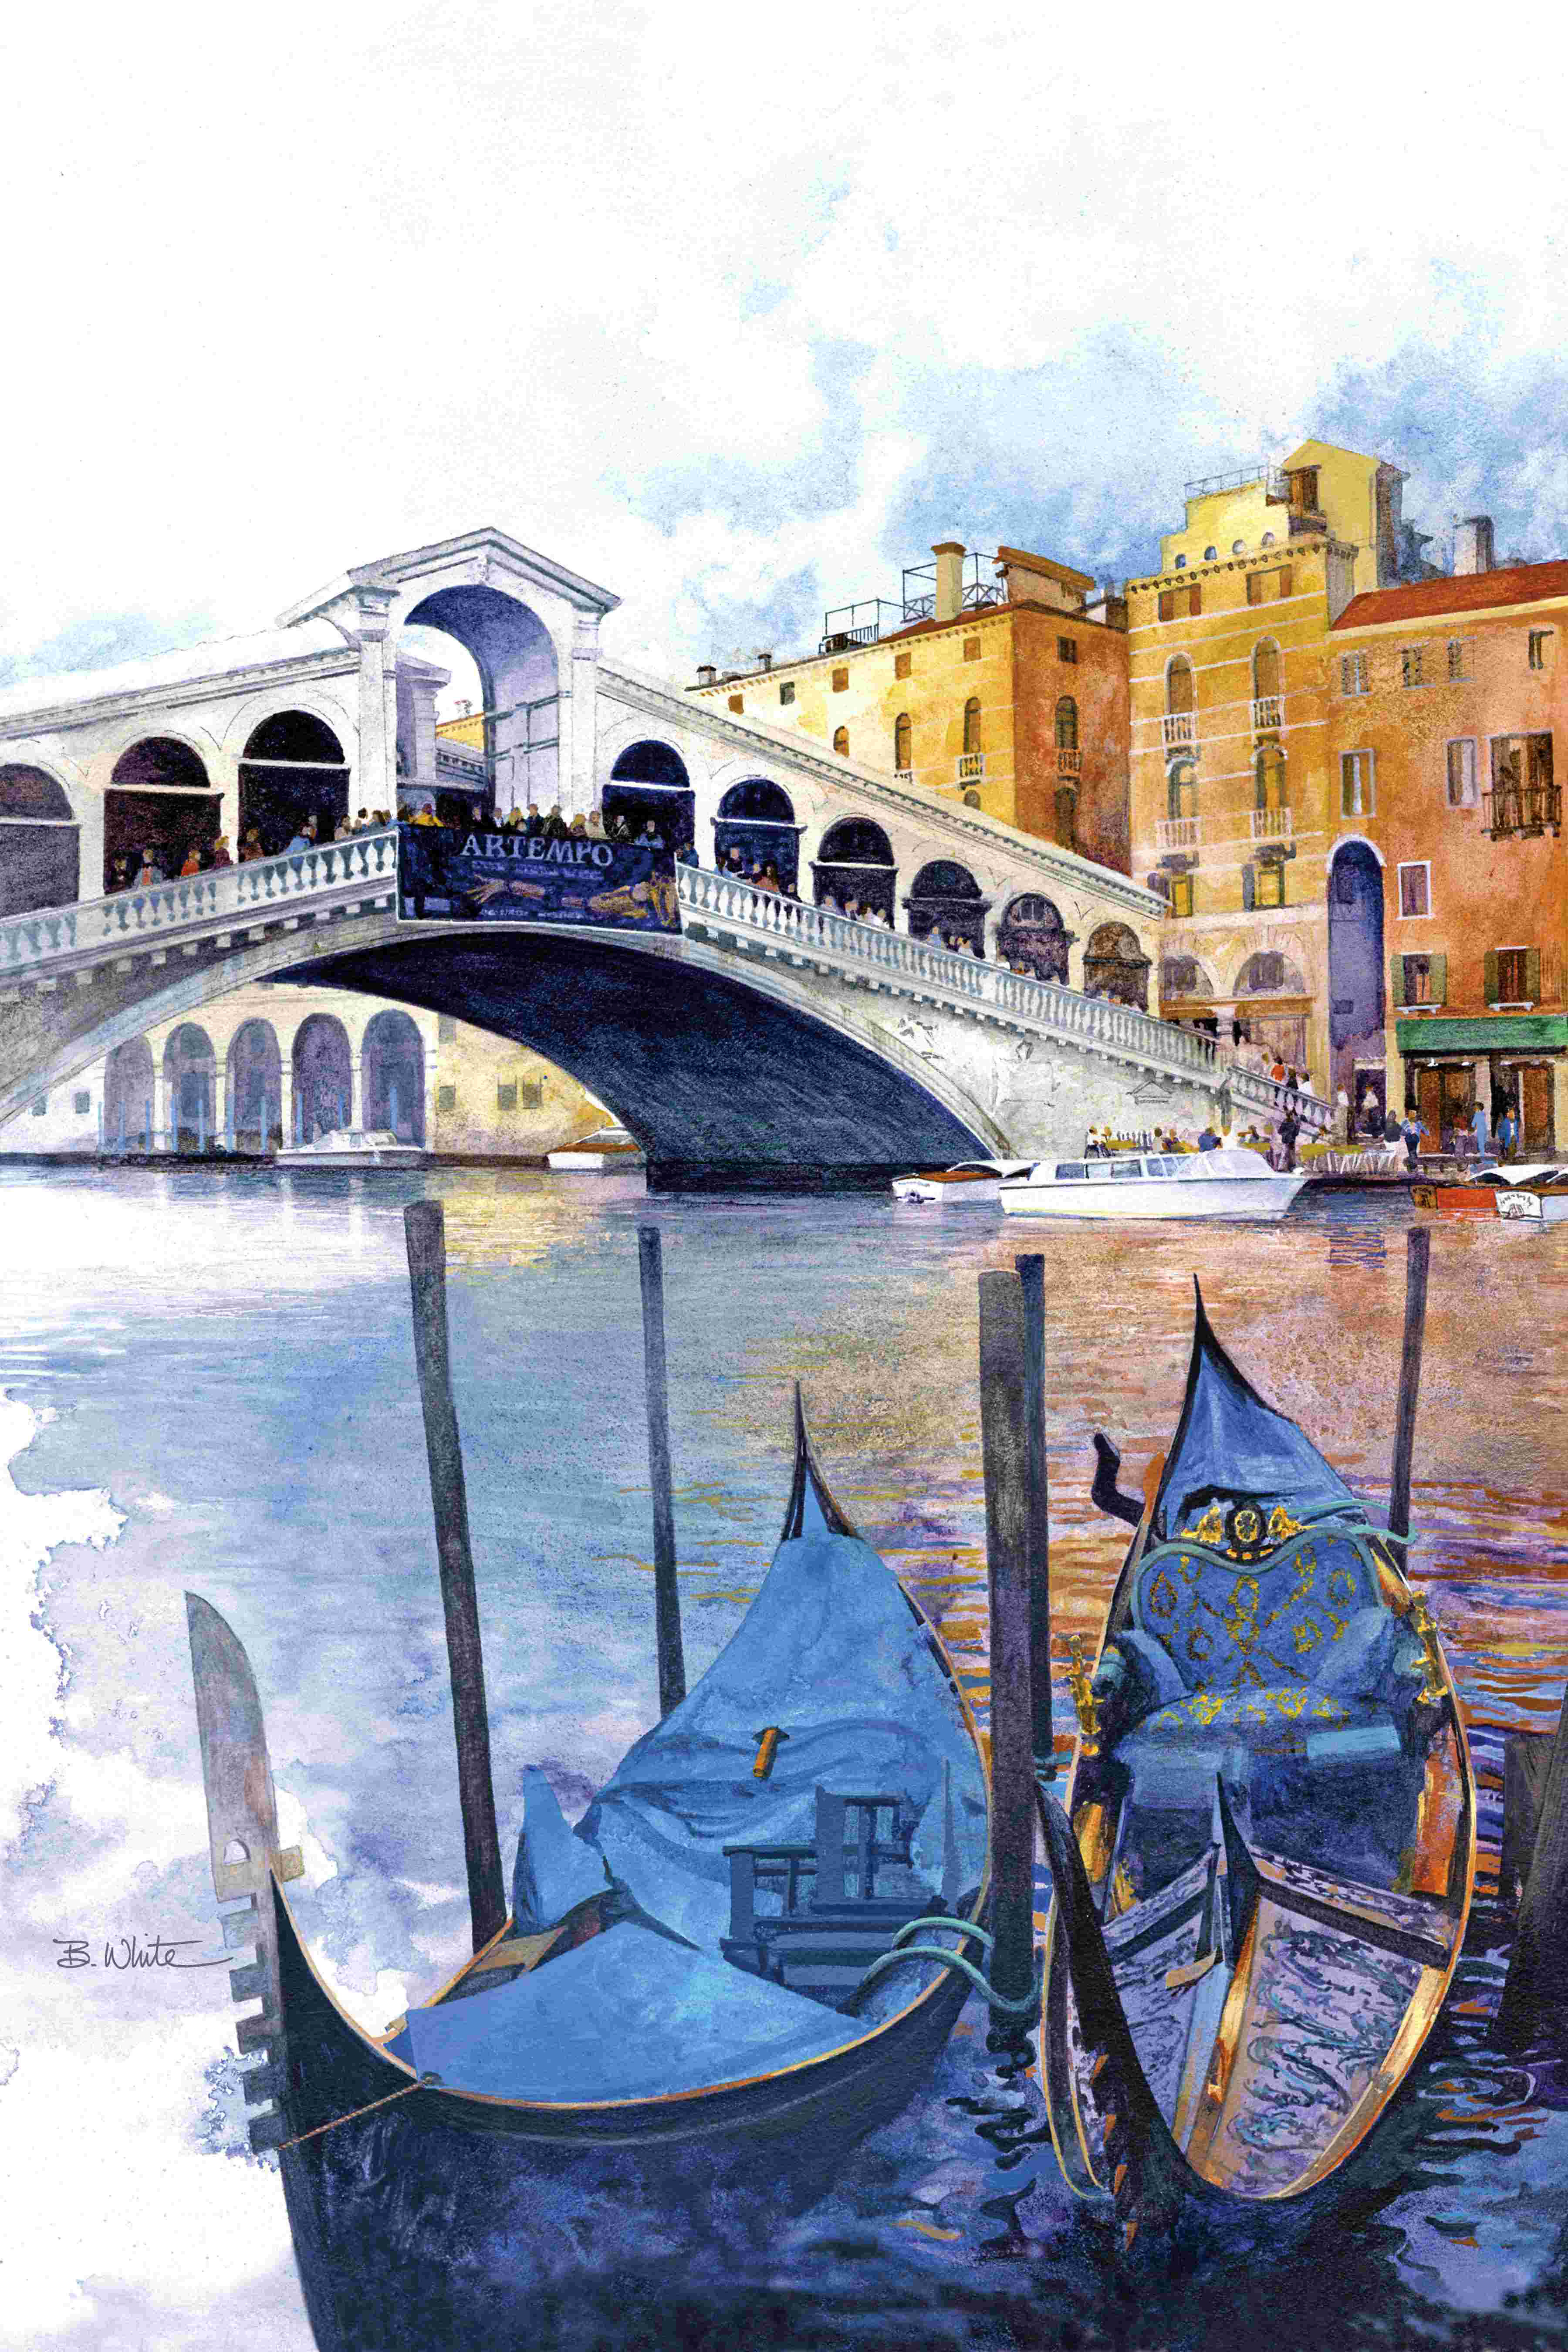 Paint by Numbers Kit Vintage Venice